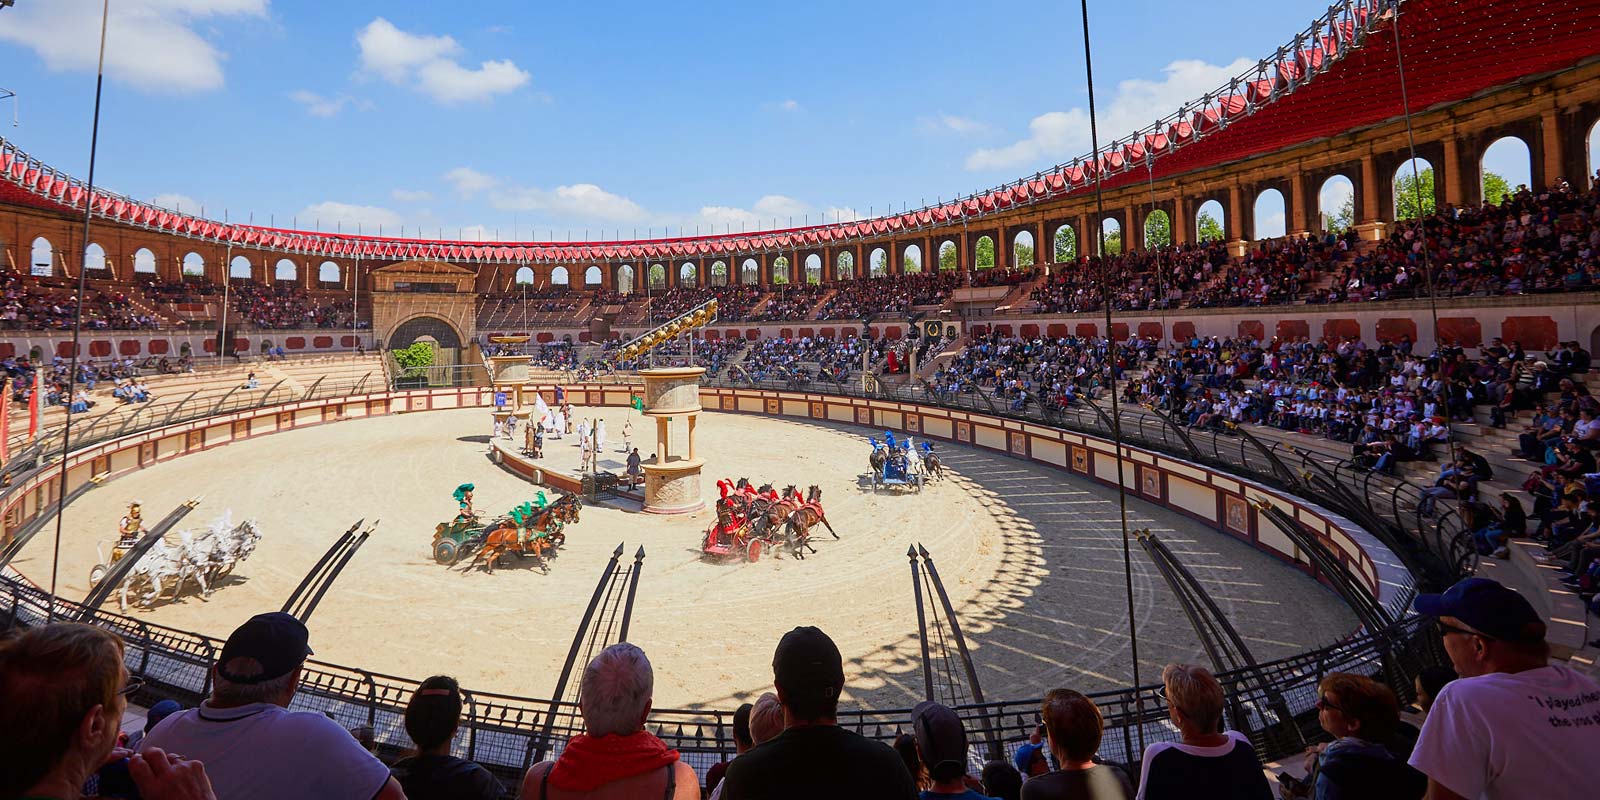 Circus games show at Puy du Fou in Vendée